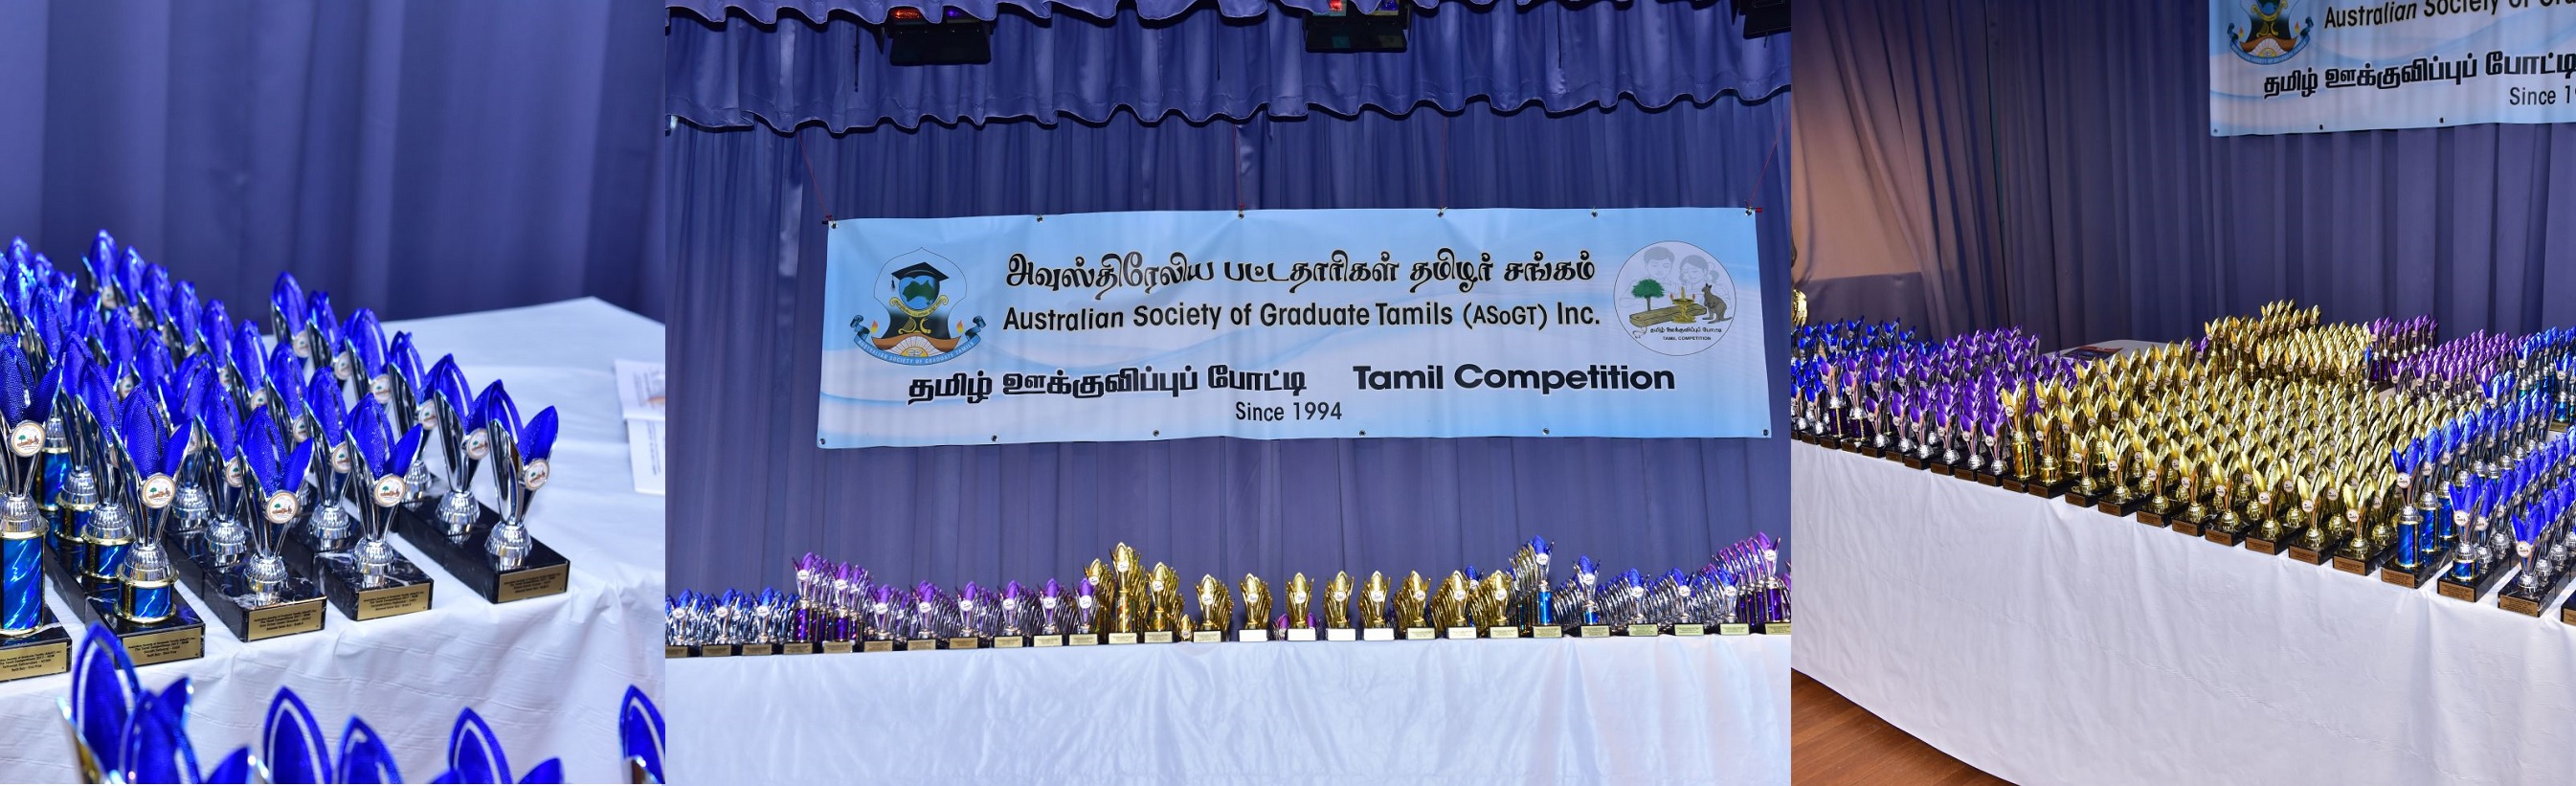 Tamil Competition